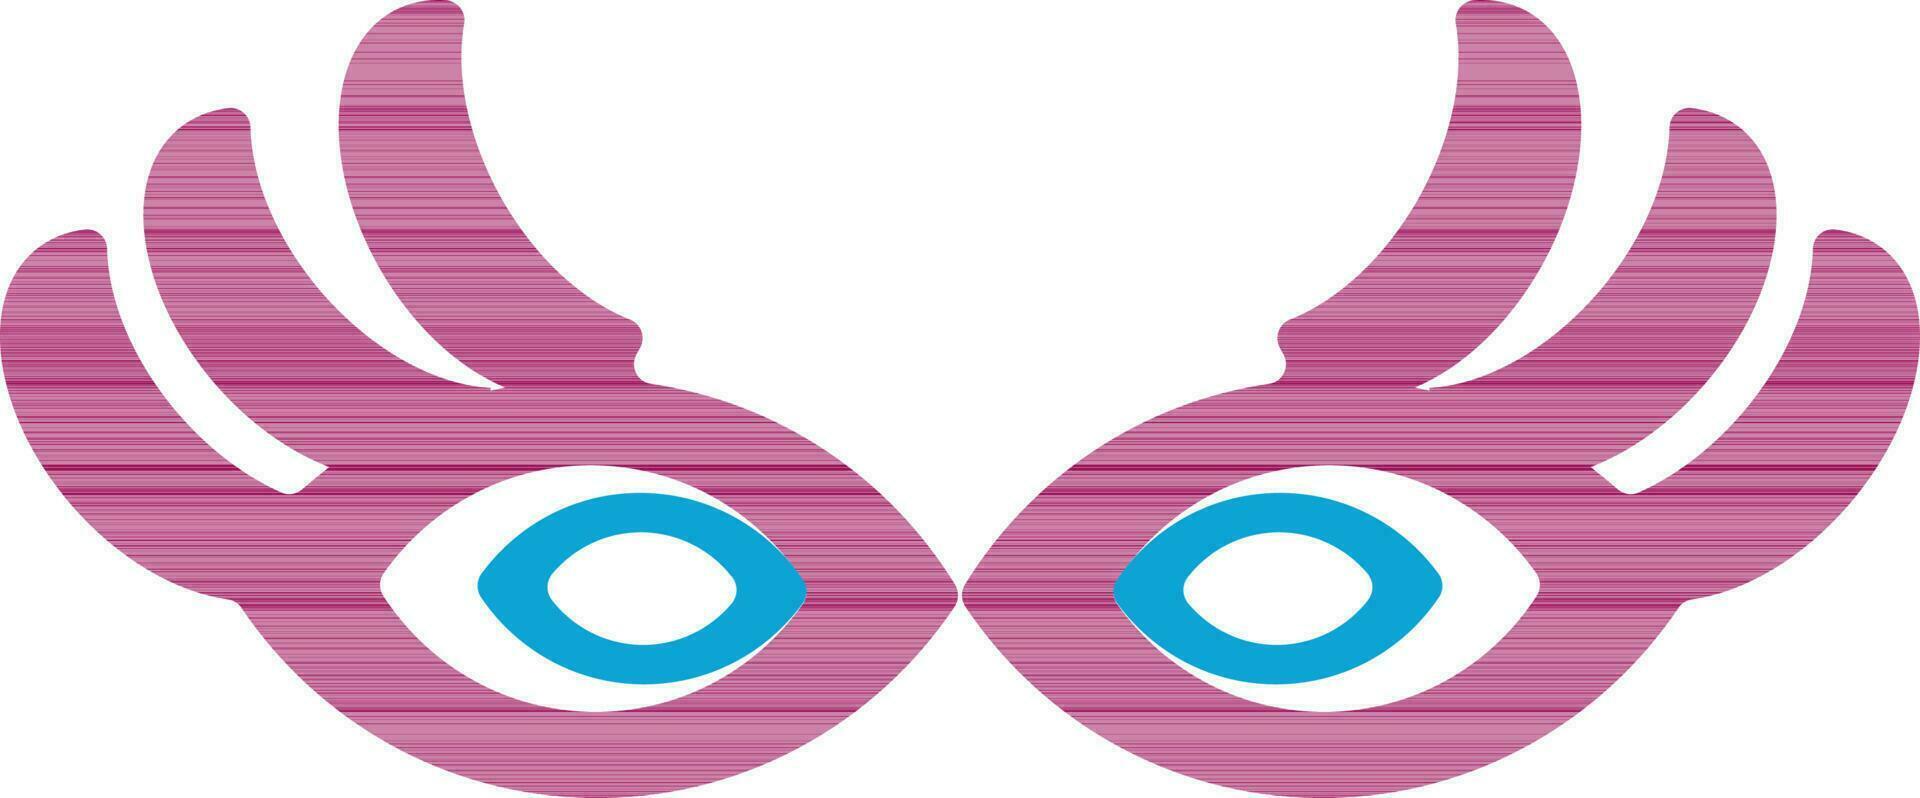 Illustration of a pink and blue masquerade mask. vector